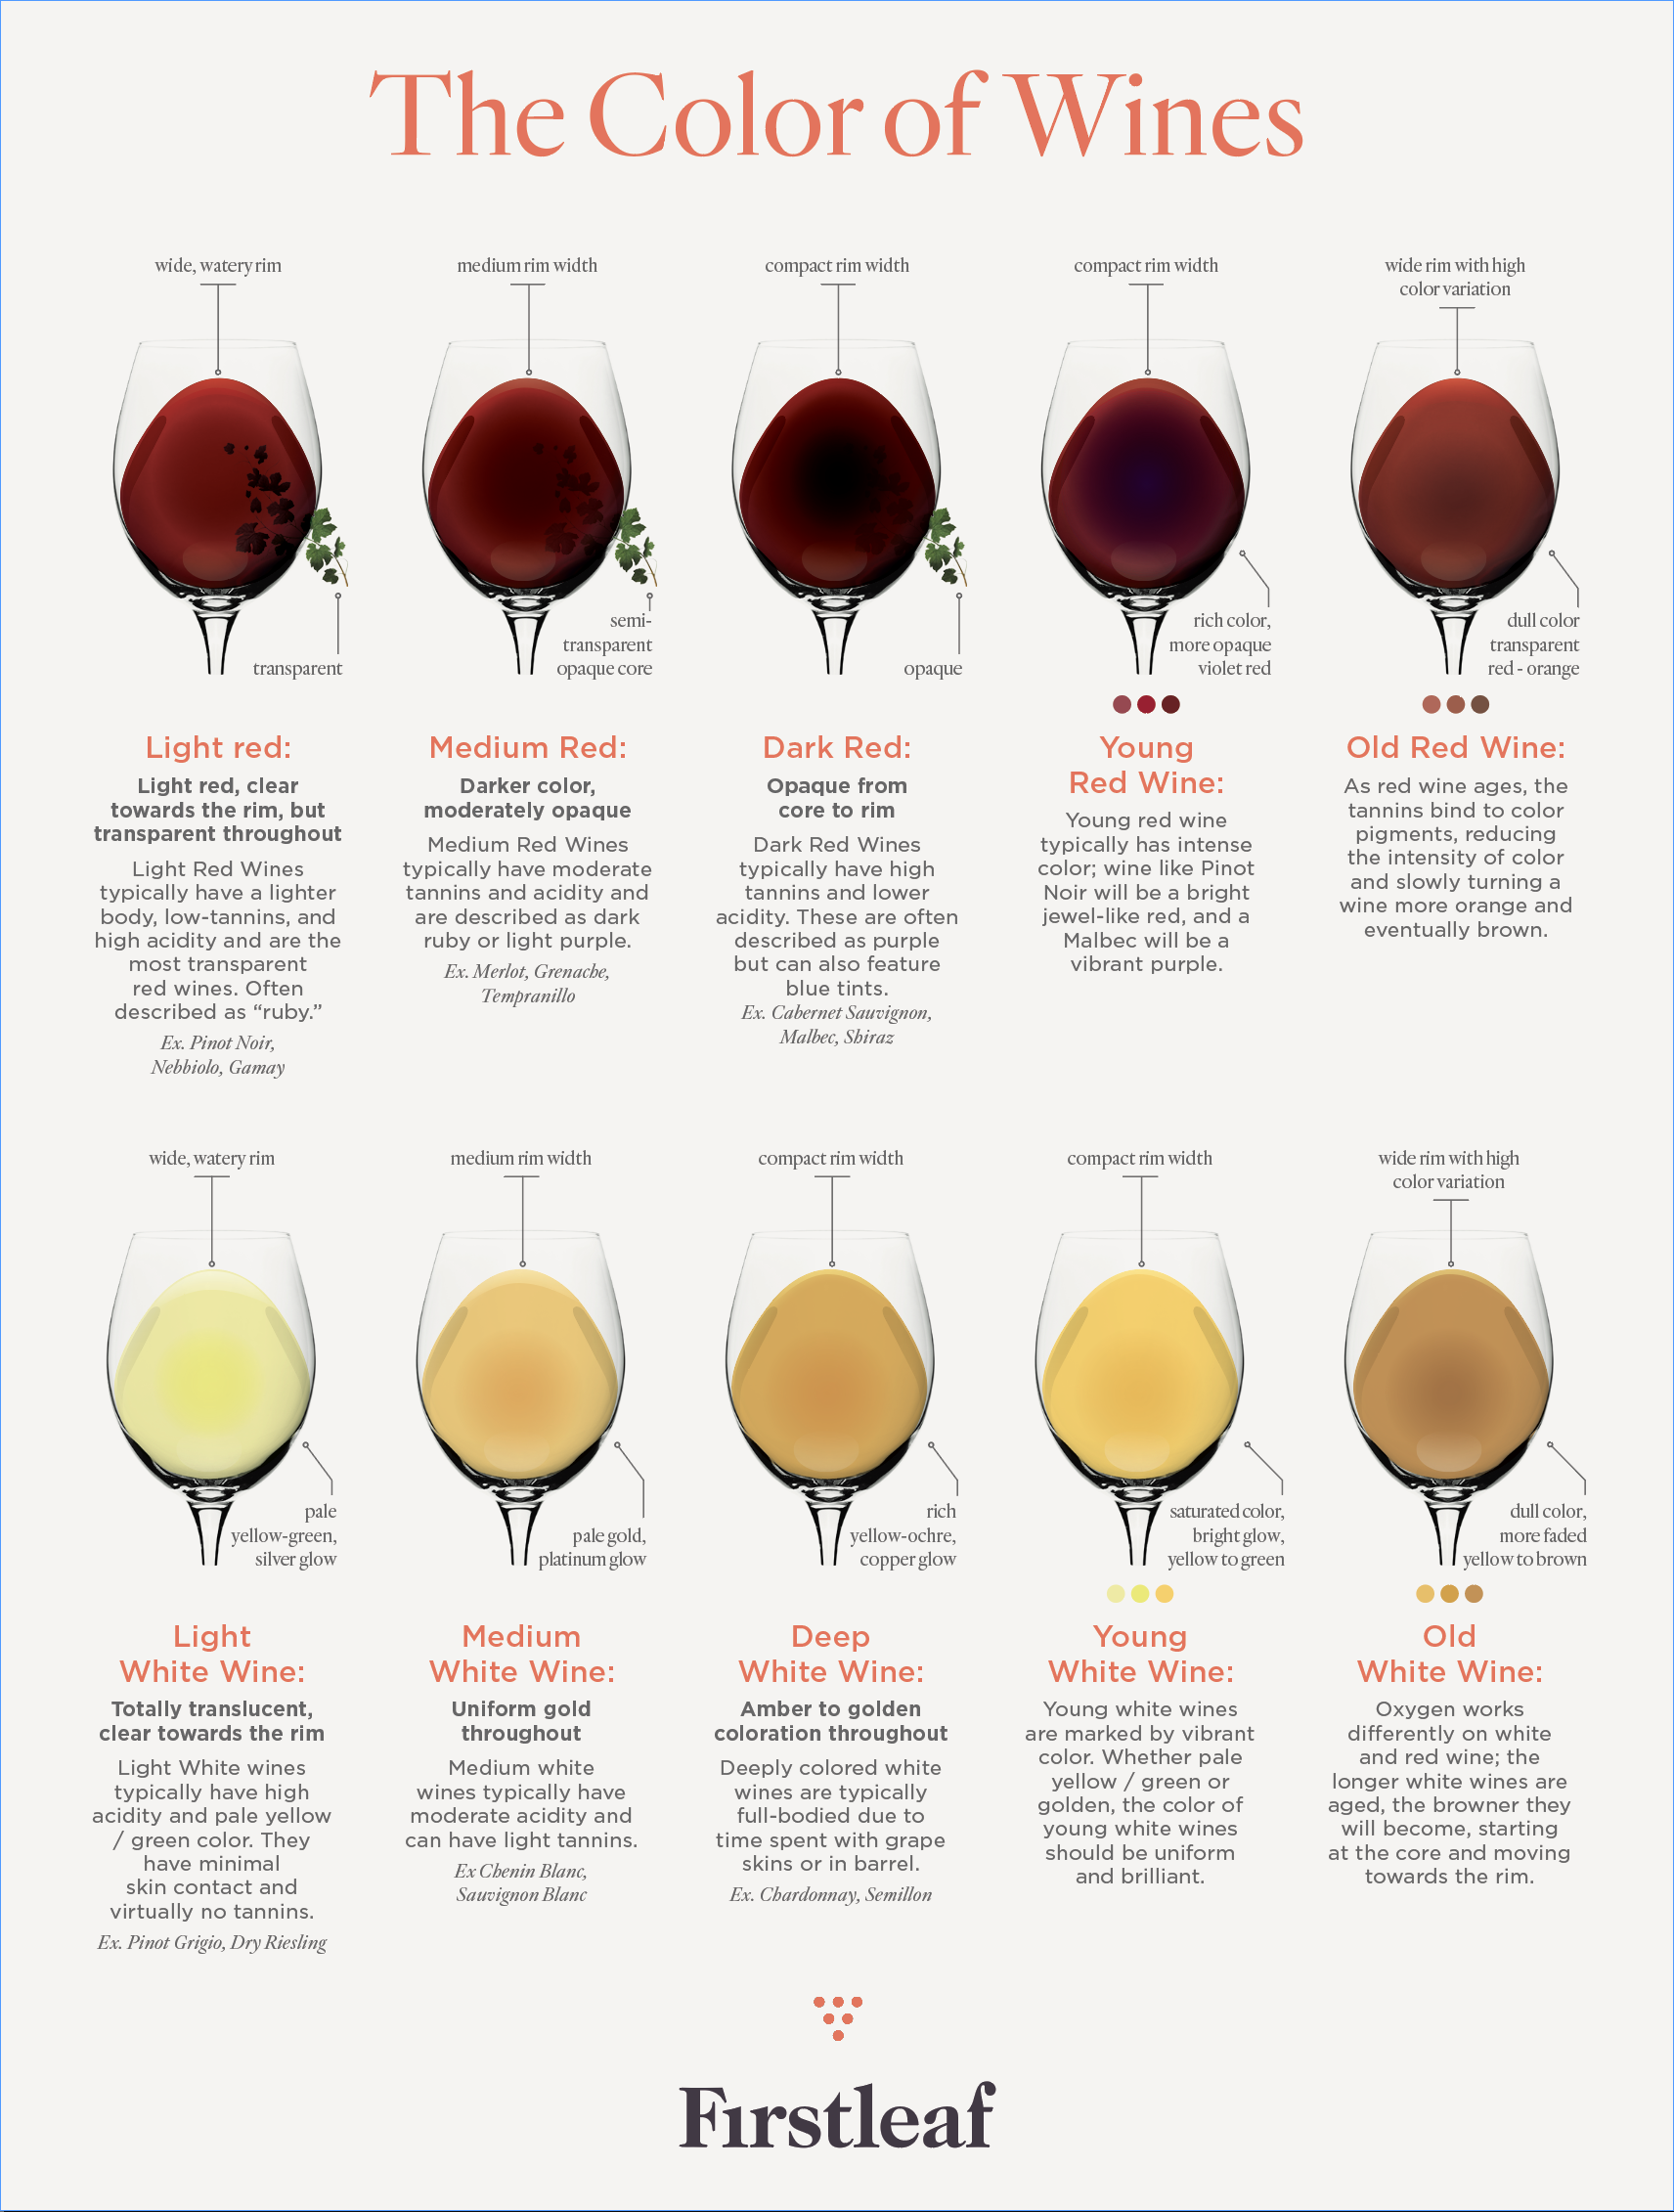 Wine color chart depicting 10 glasses of wine and information about what wine that looks like each generally tastes like.